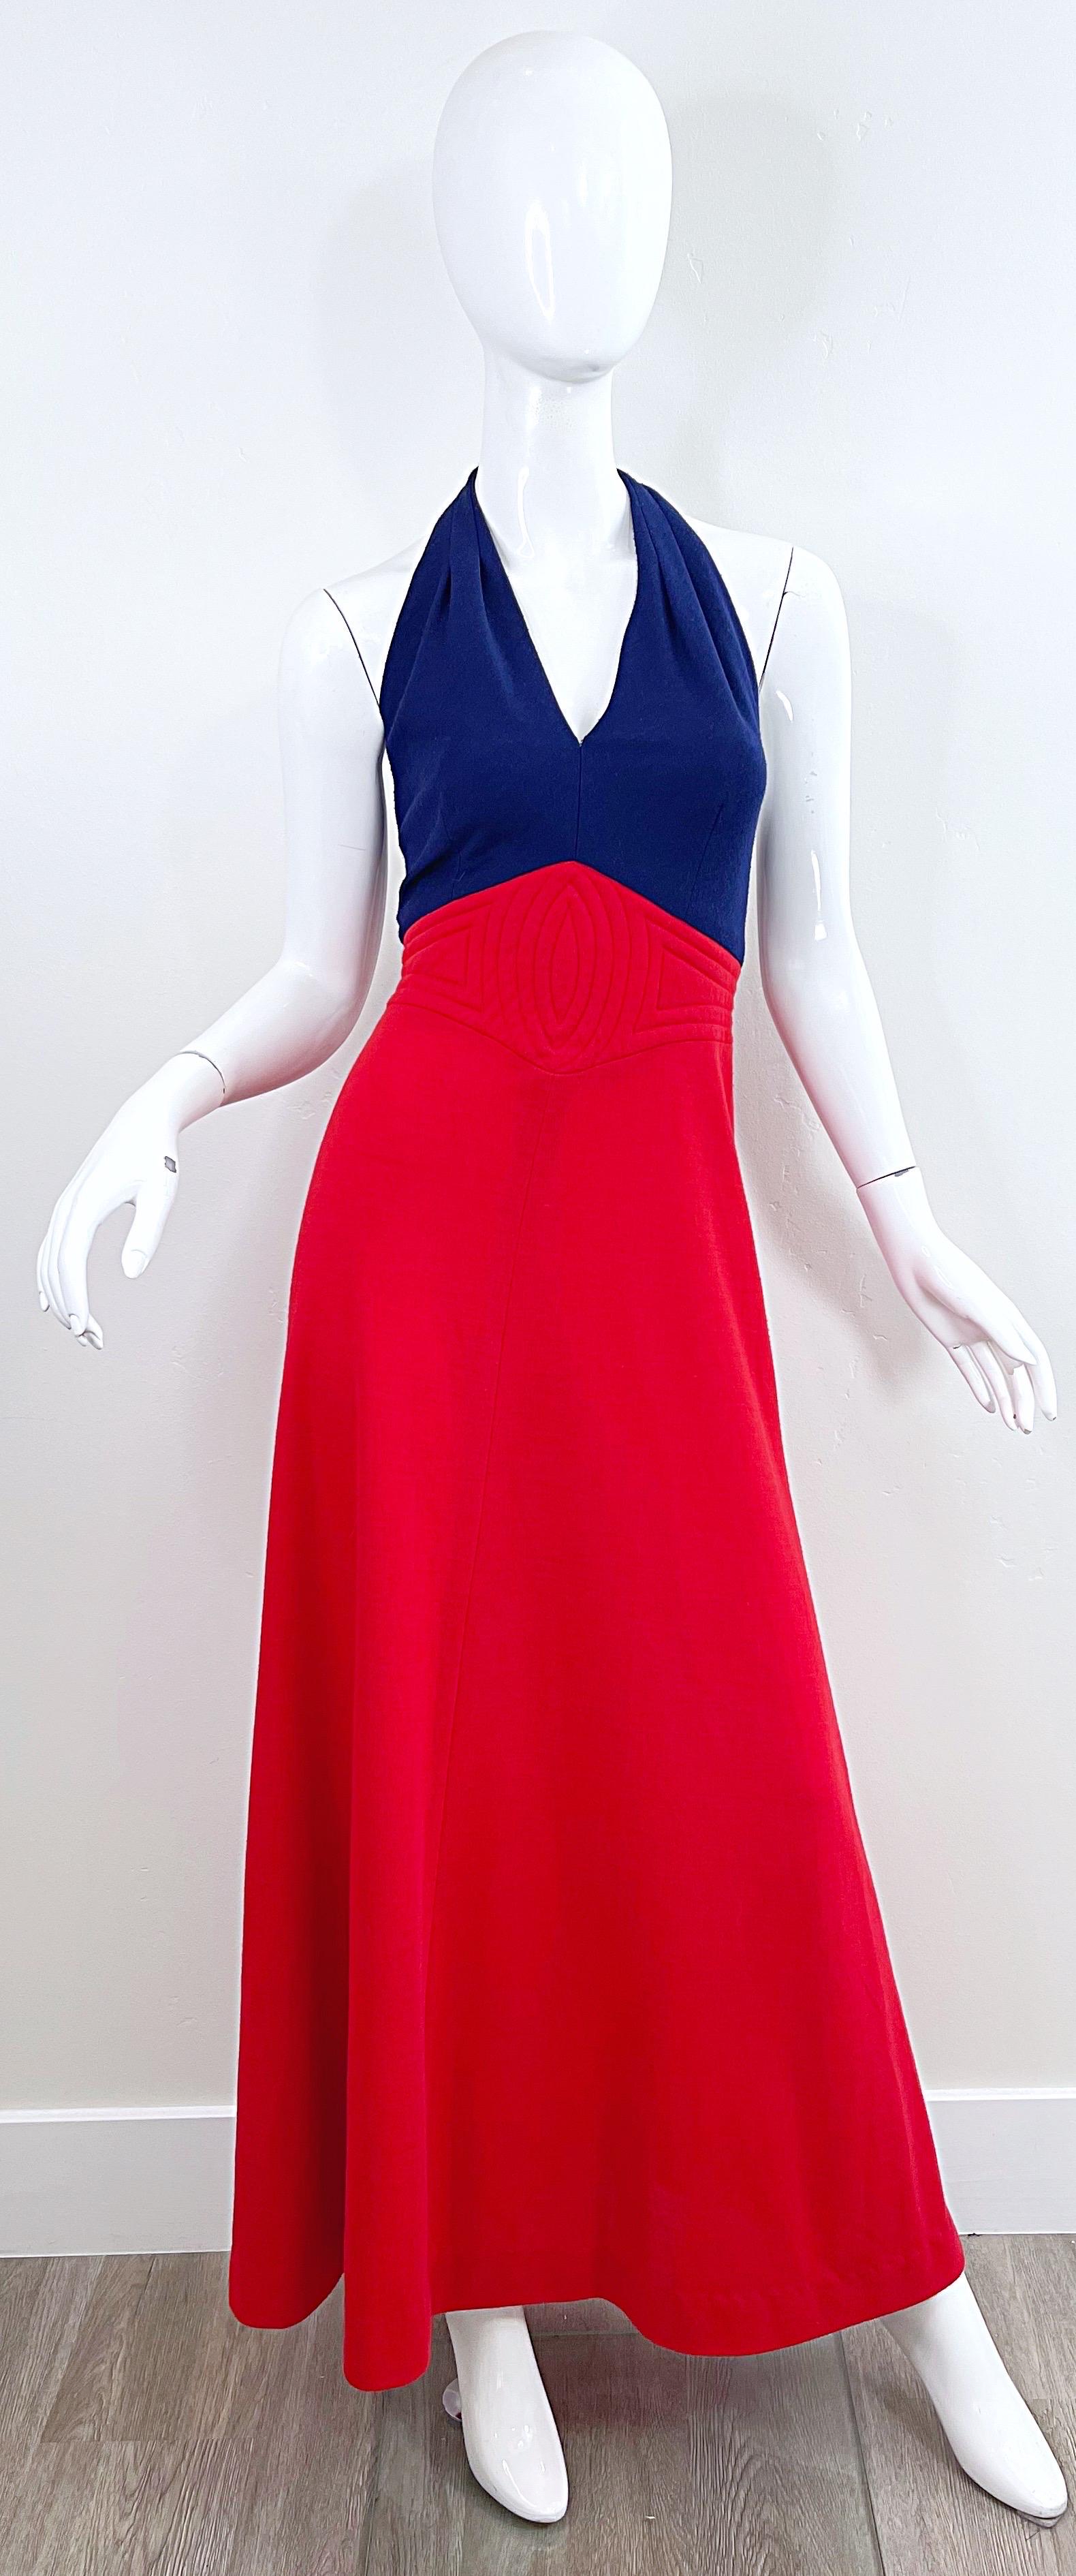 Chic vintage 70s GAY GIBSON navy blue and red wool halter maxi dress ! Features a tailored navy bodice with a full red skirt. Hidden zipper up the back with hook-and-eye closure. Hook-and-eye closures at back neck as well. 
In great condition
Made